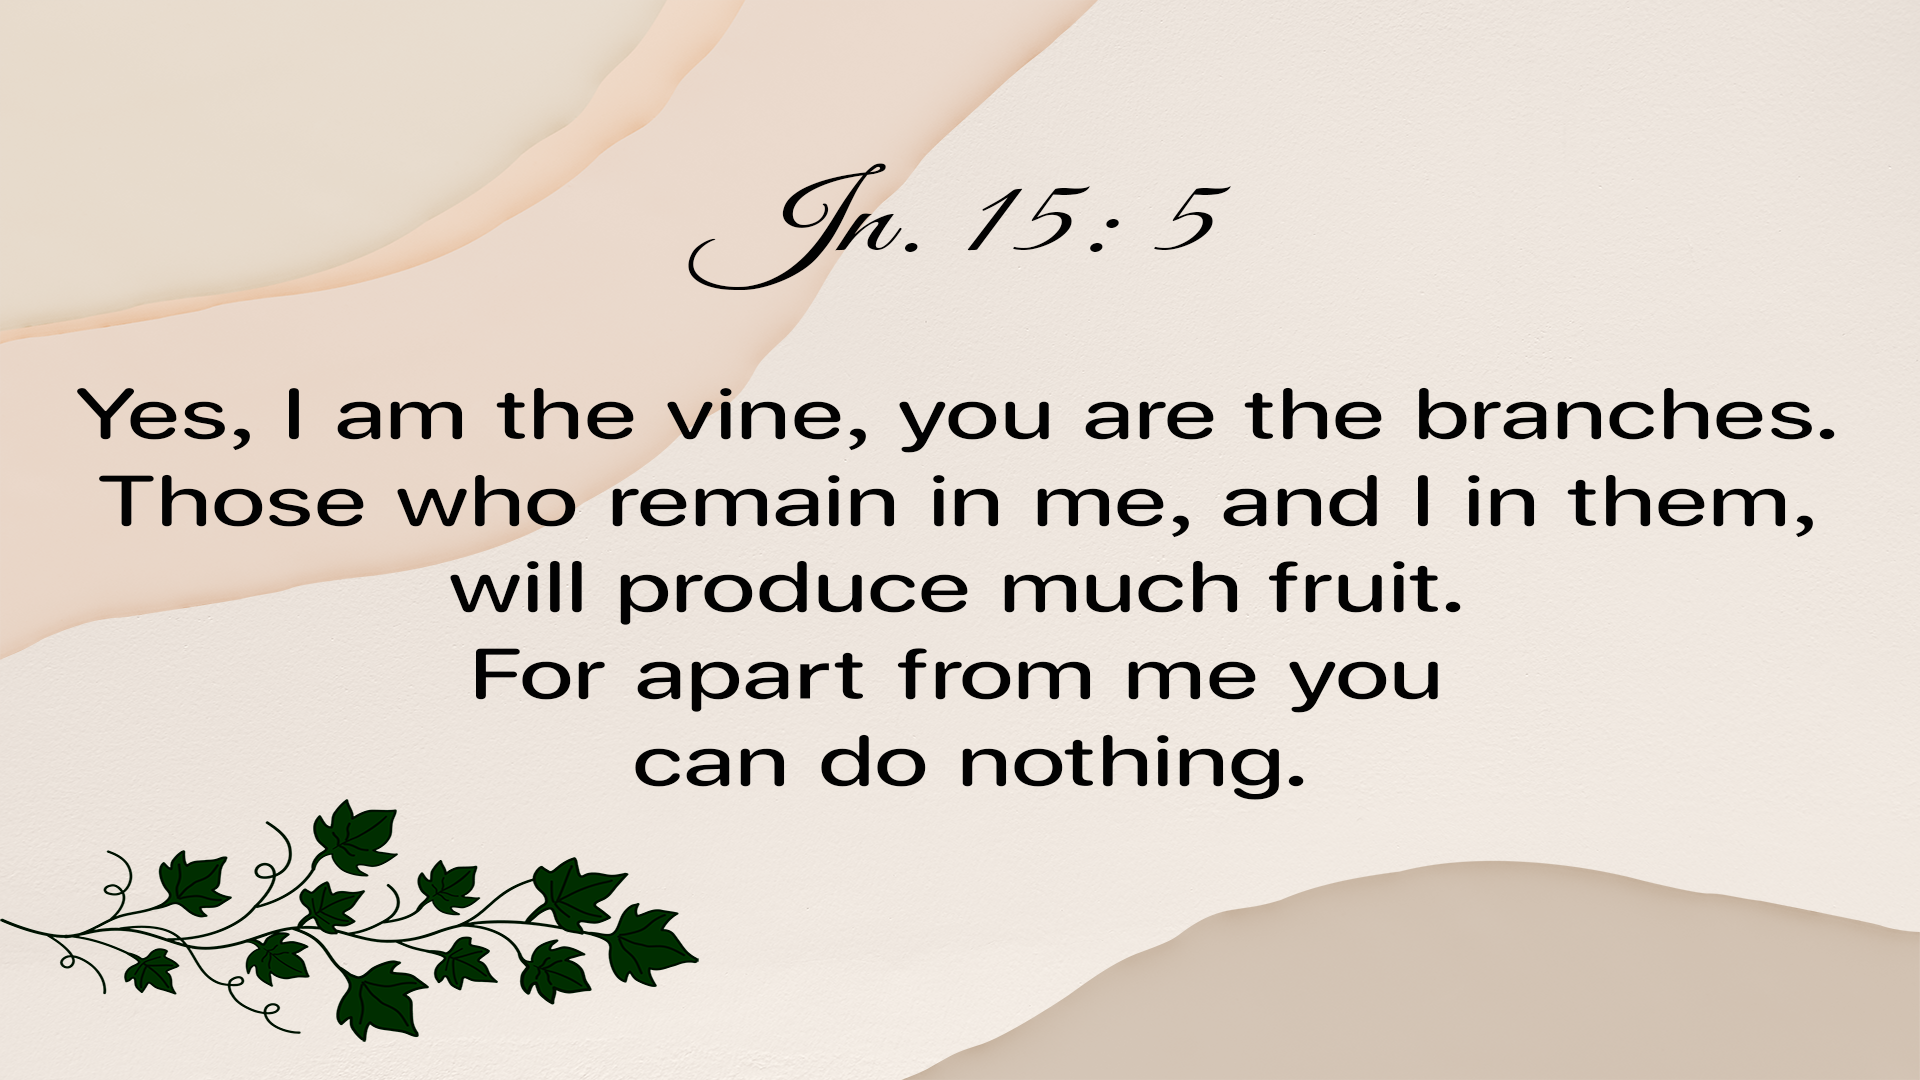 Yes, I am the vine; you are the branches. Those who remain in me, and I in them, will produce much fruit. For apart from me you can do nothing.